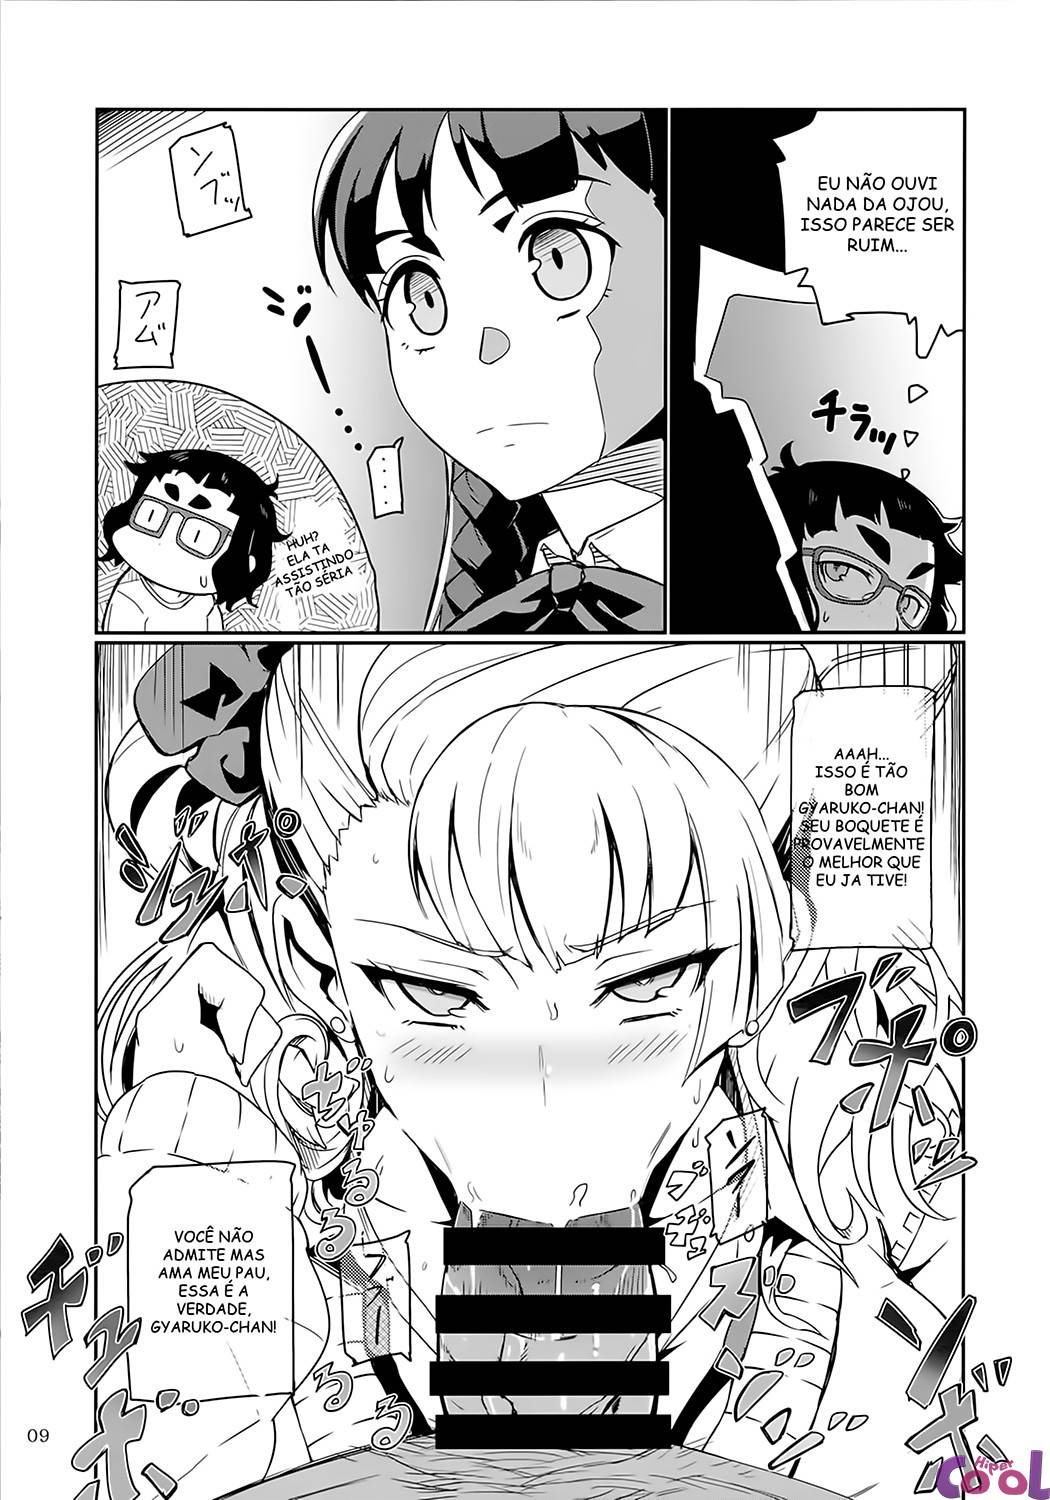 galko-ah--chapter-01-page-09.jpg